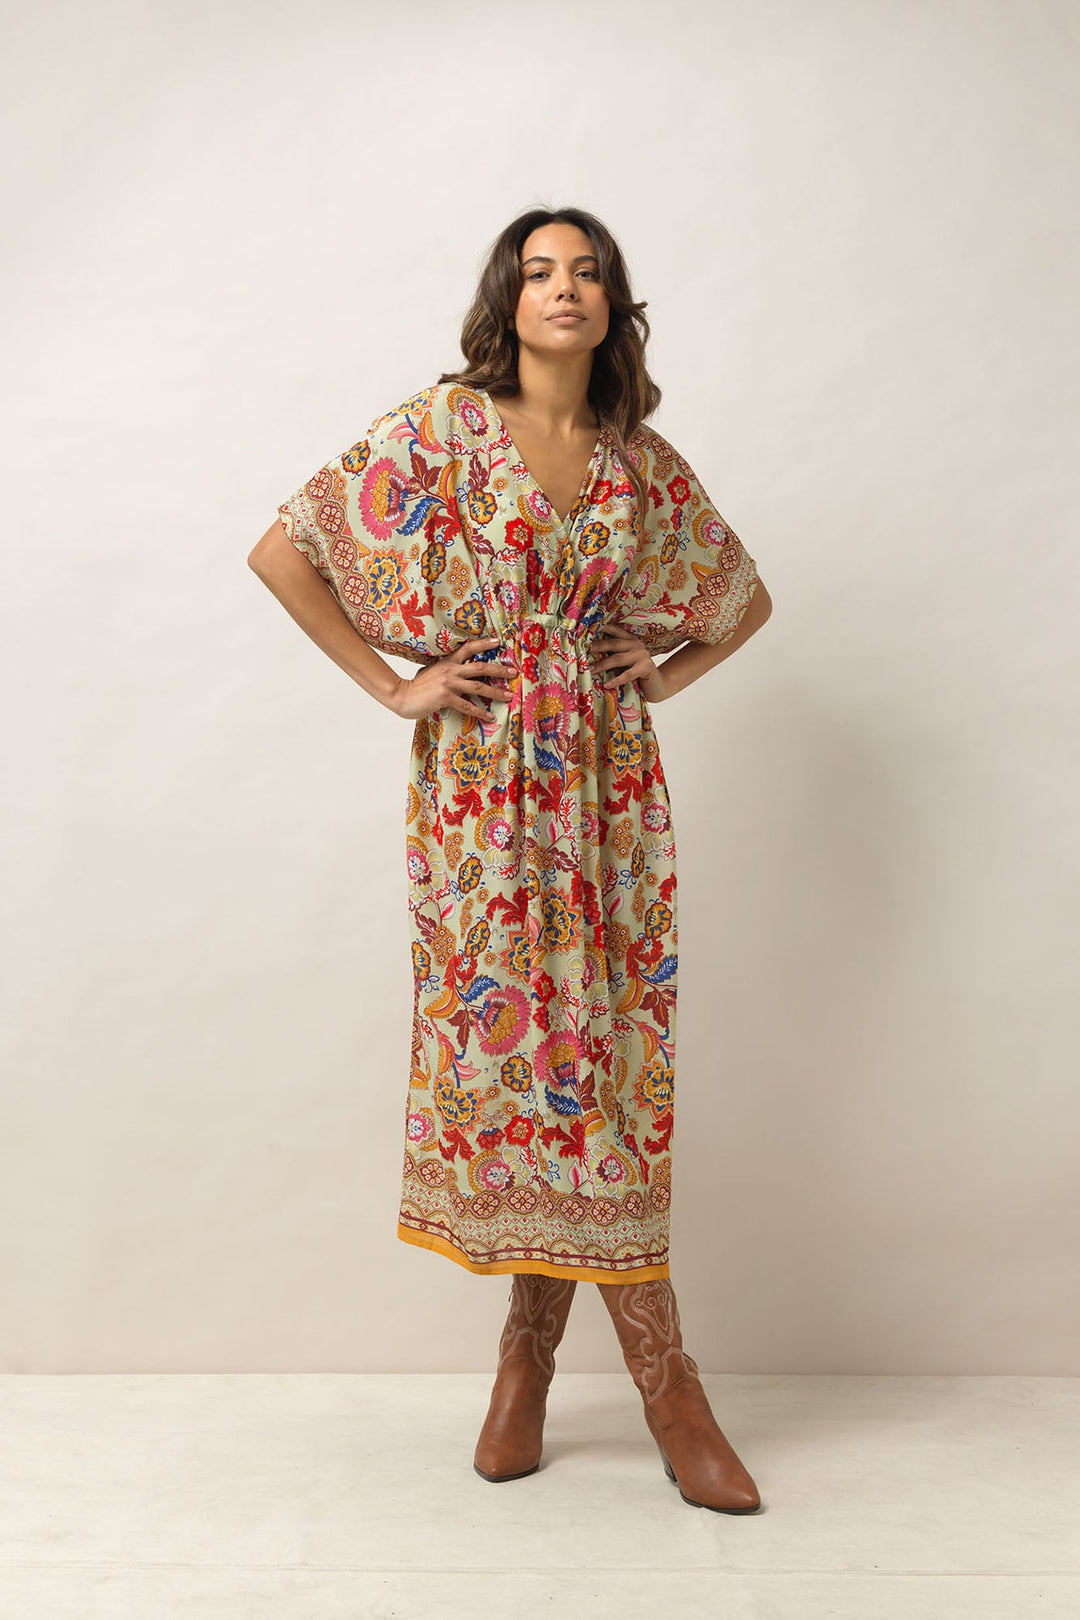 Women's lightweight beach cover up dress with tie waist in taupe with Indian flower floral print by One Hundred Stars